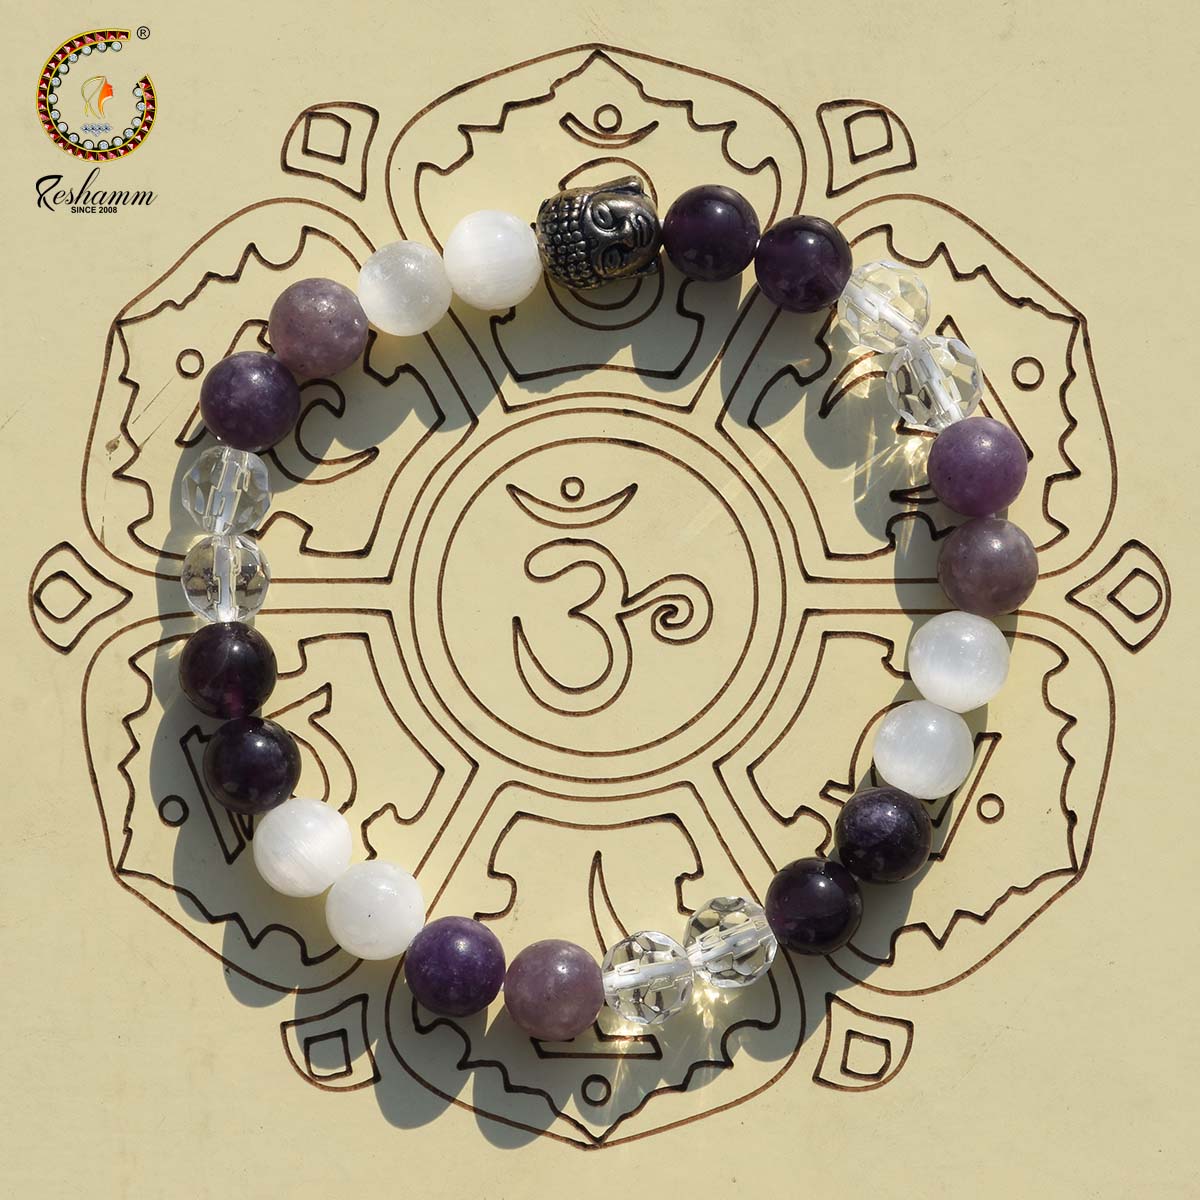 Reshamm Pre Energized Natural Crown Chakra Crystal Stone Bracelet With 8 mm Beads